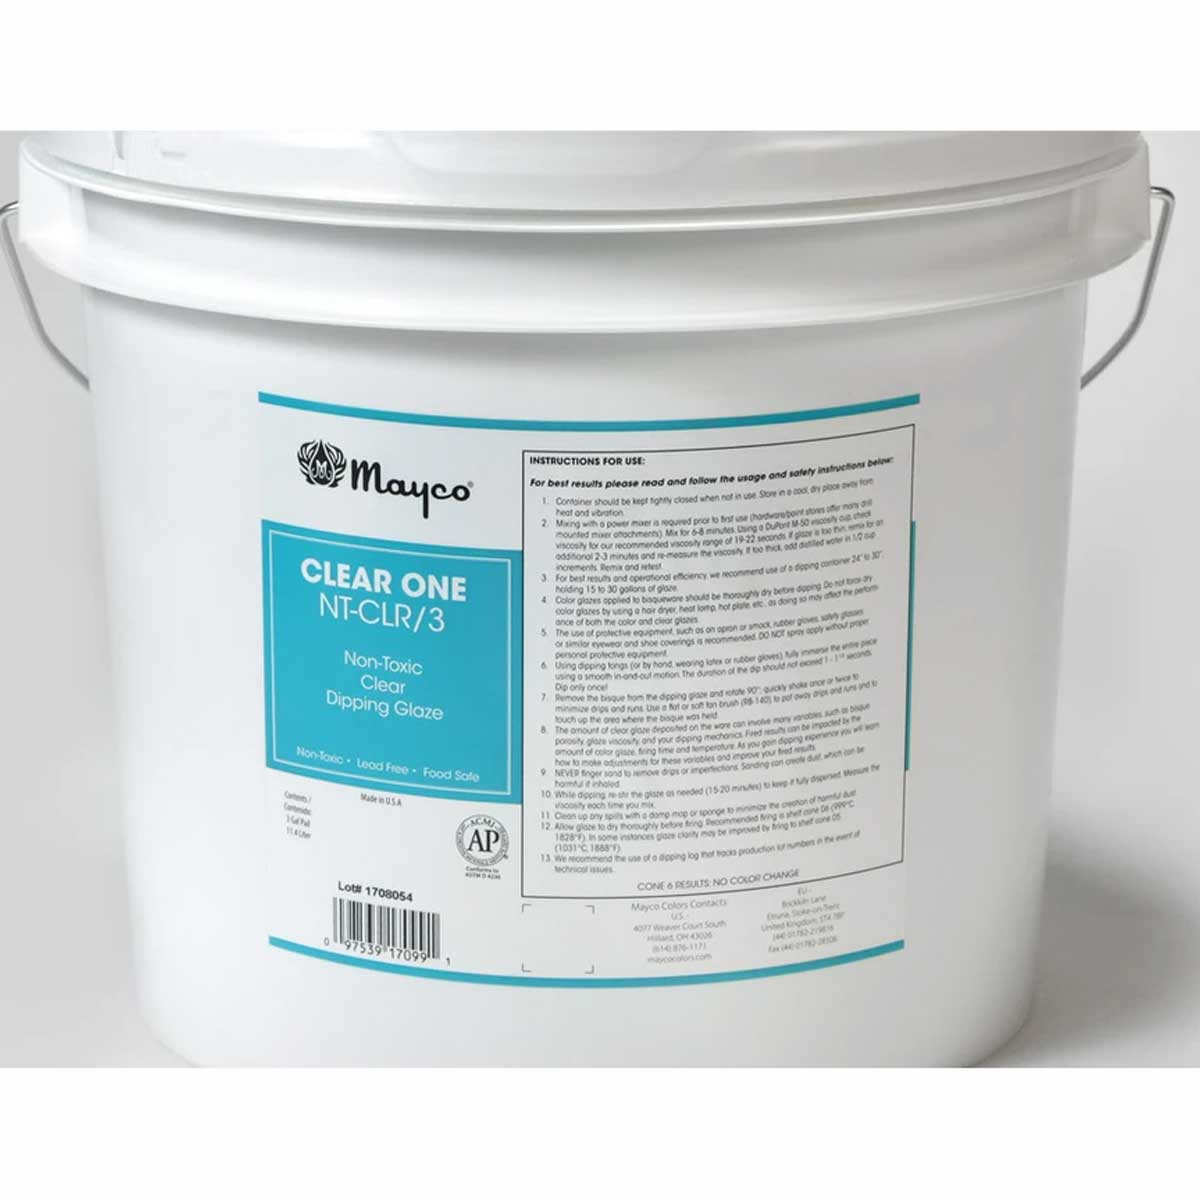 Mayco NT-CLR Clear Gloss Glaze - Dipping, 3 Gallon Pail